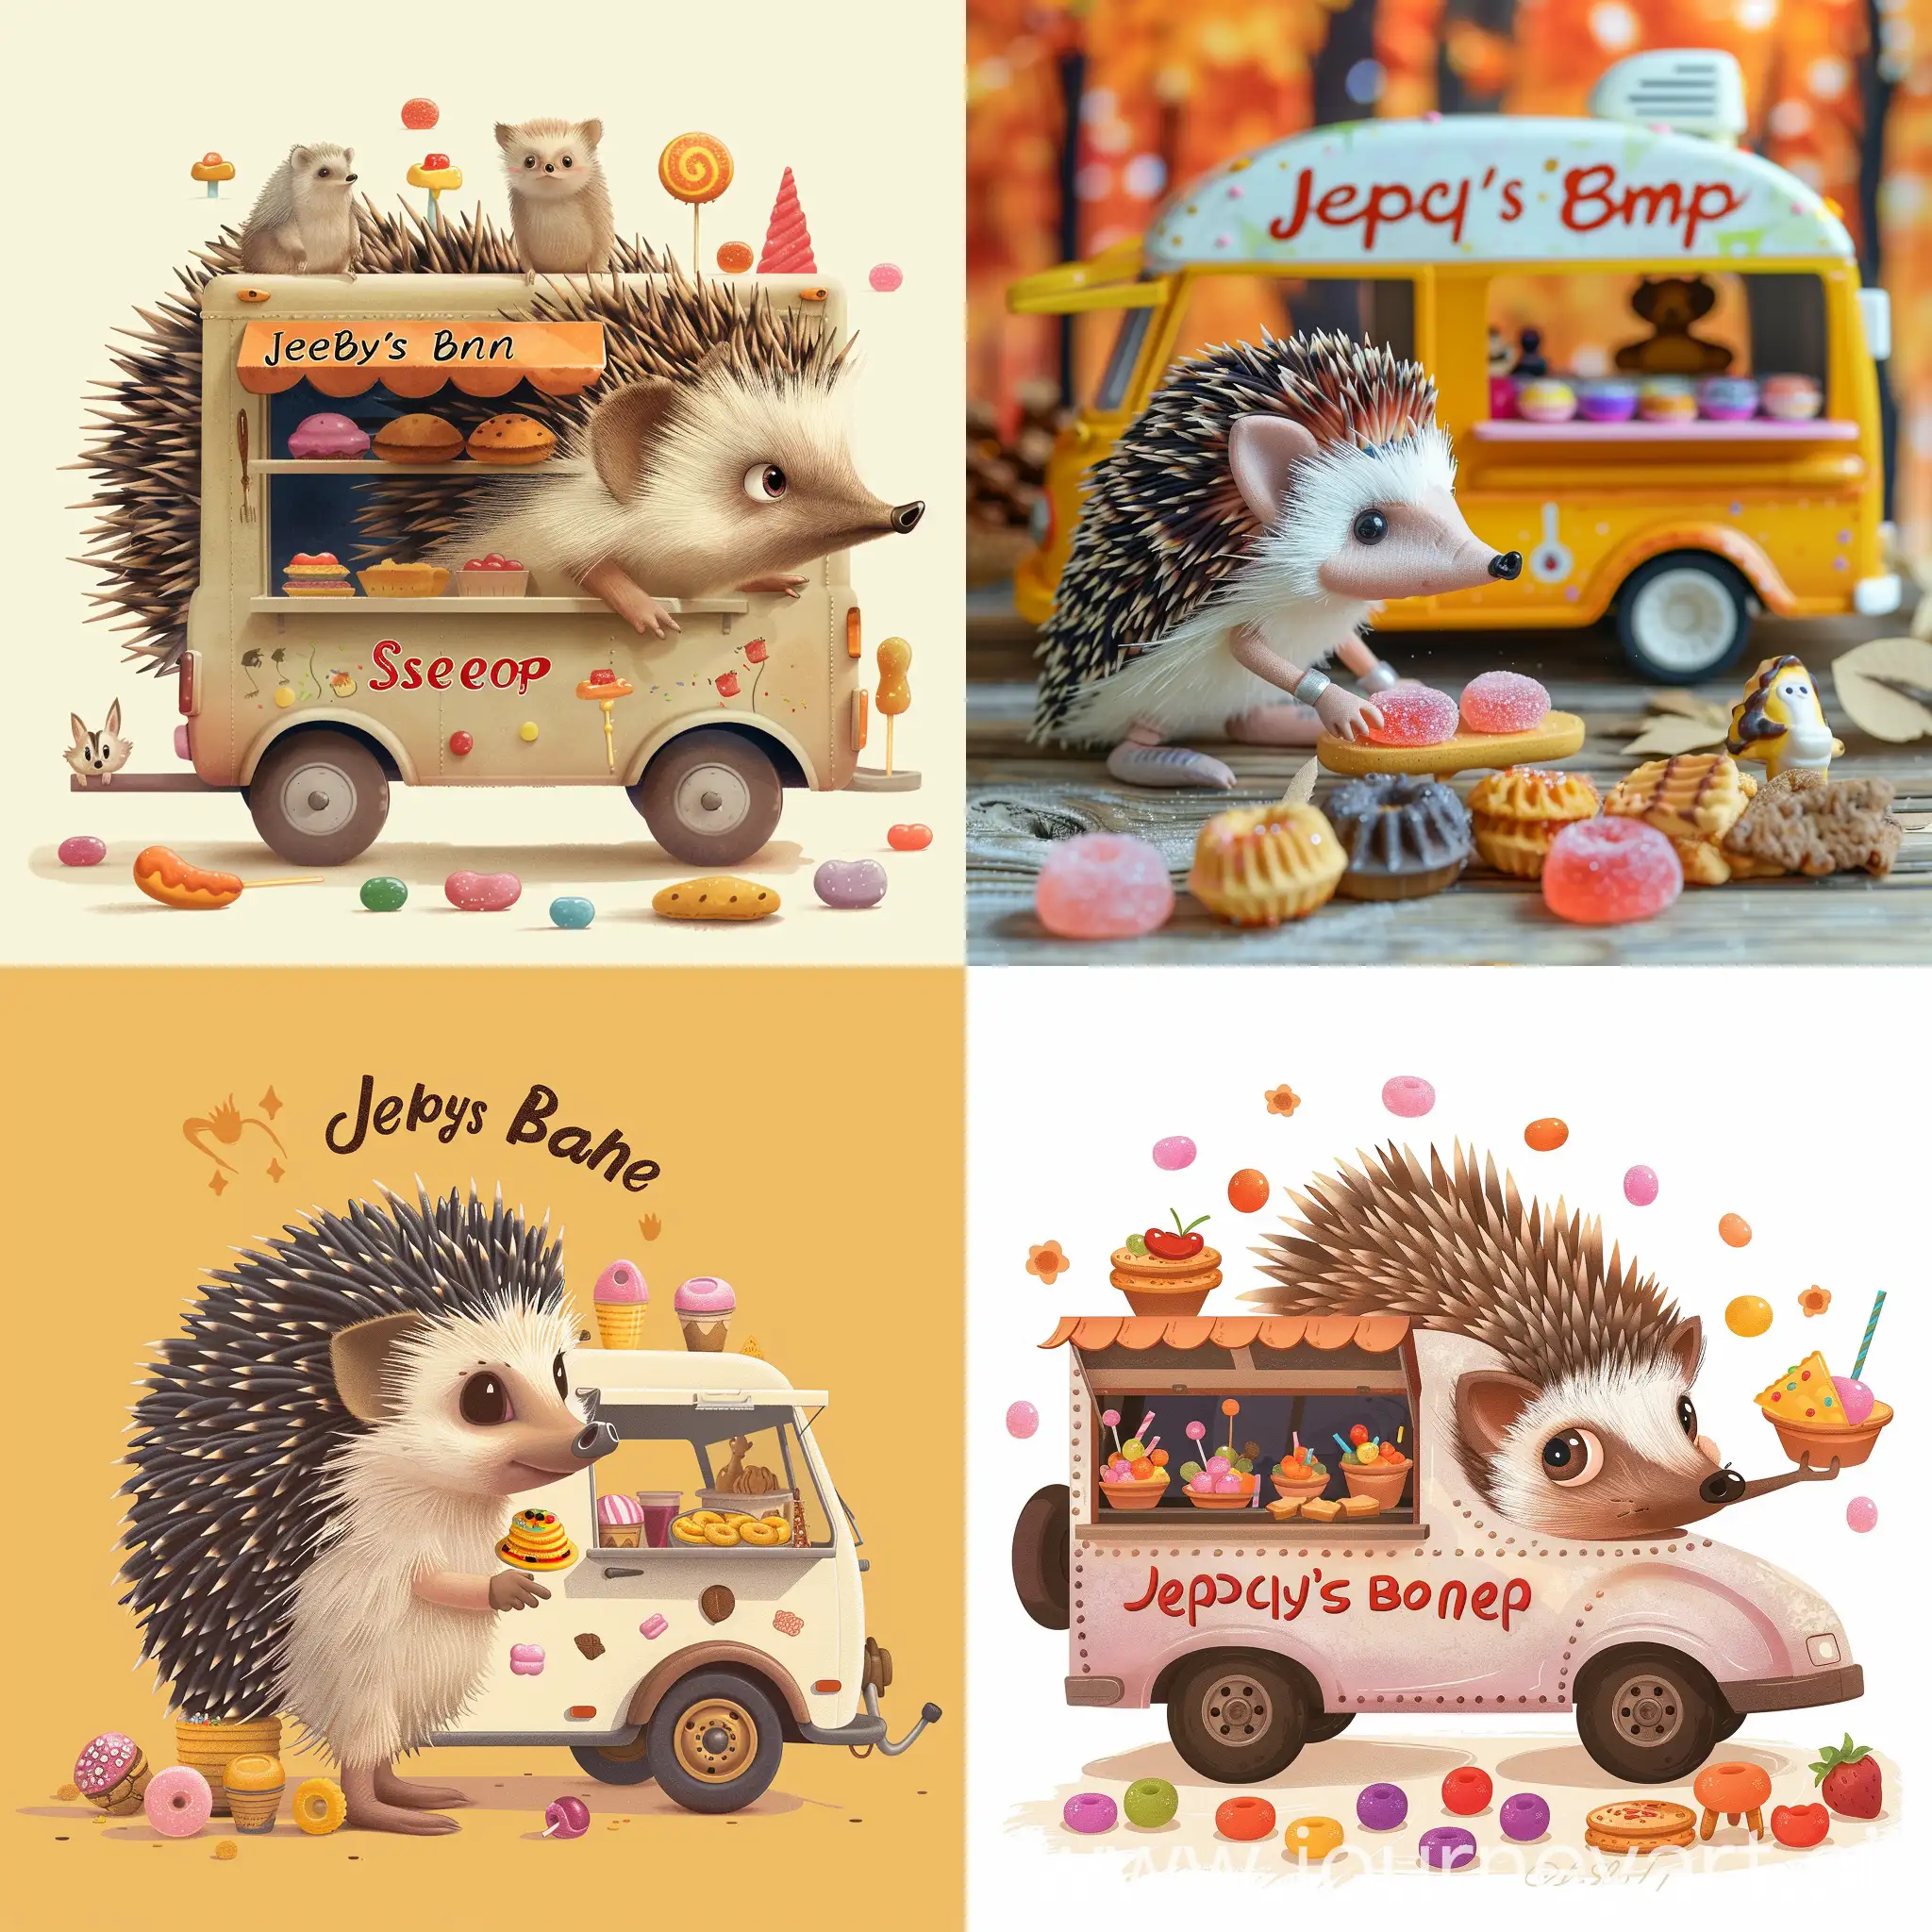 A cute hedgehog who owns a food truck named Jelly Bean's Sweet Shop, selling snacks to all of her animal friends